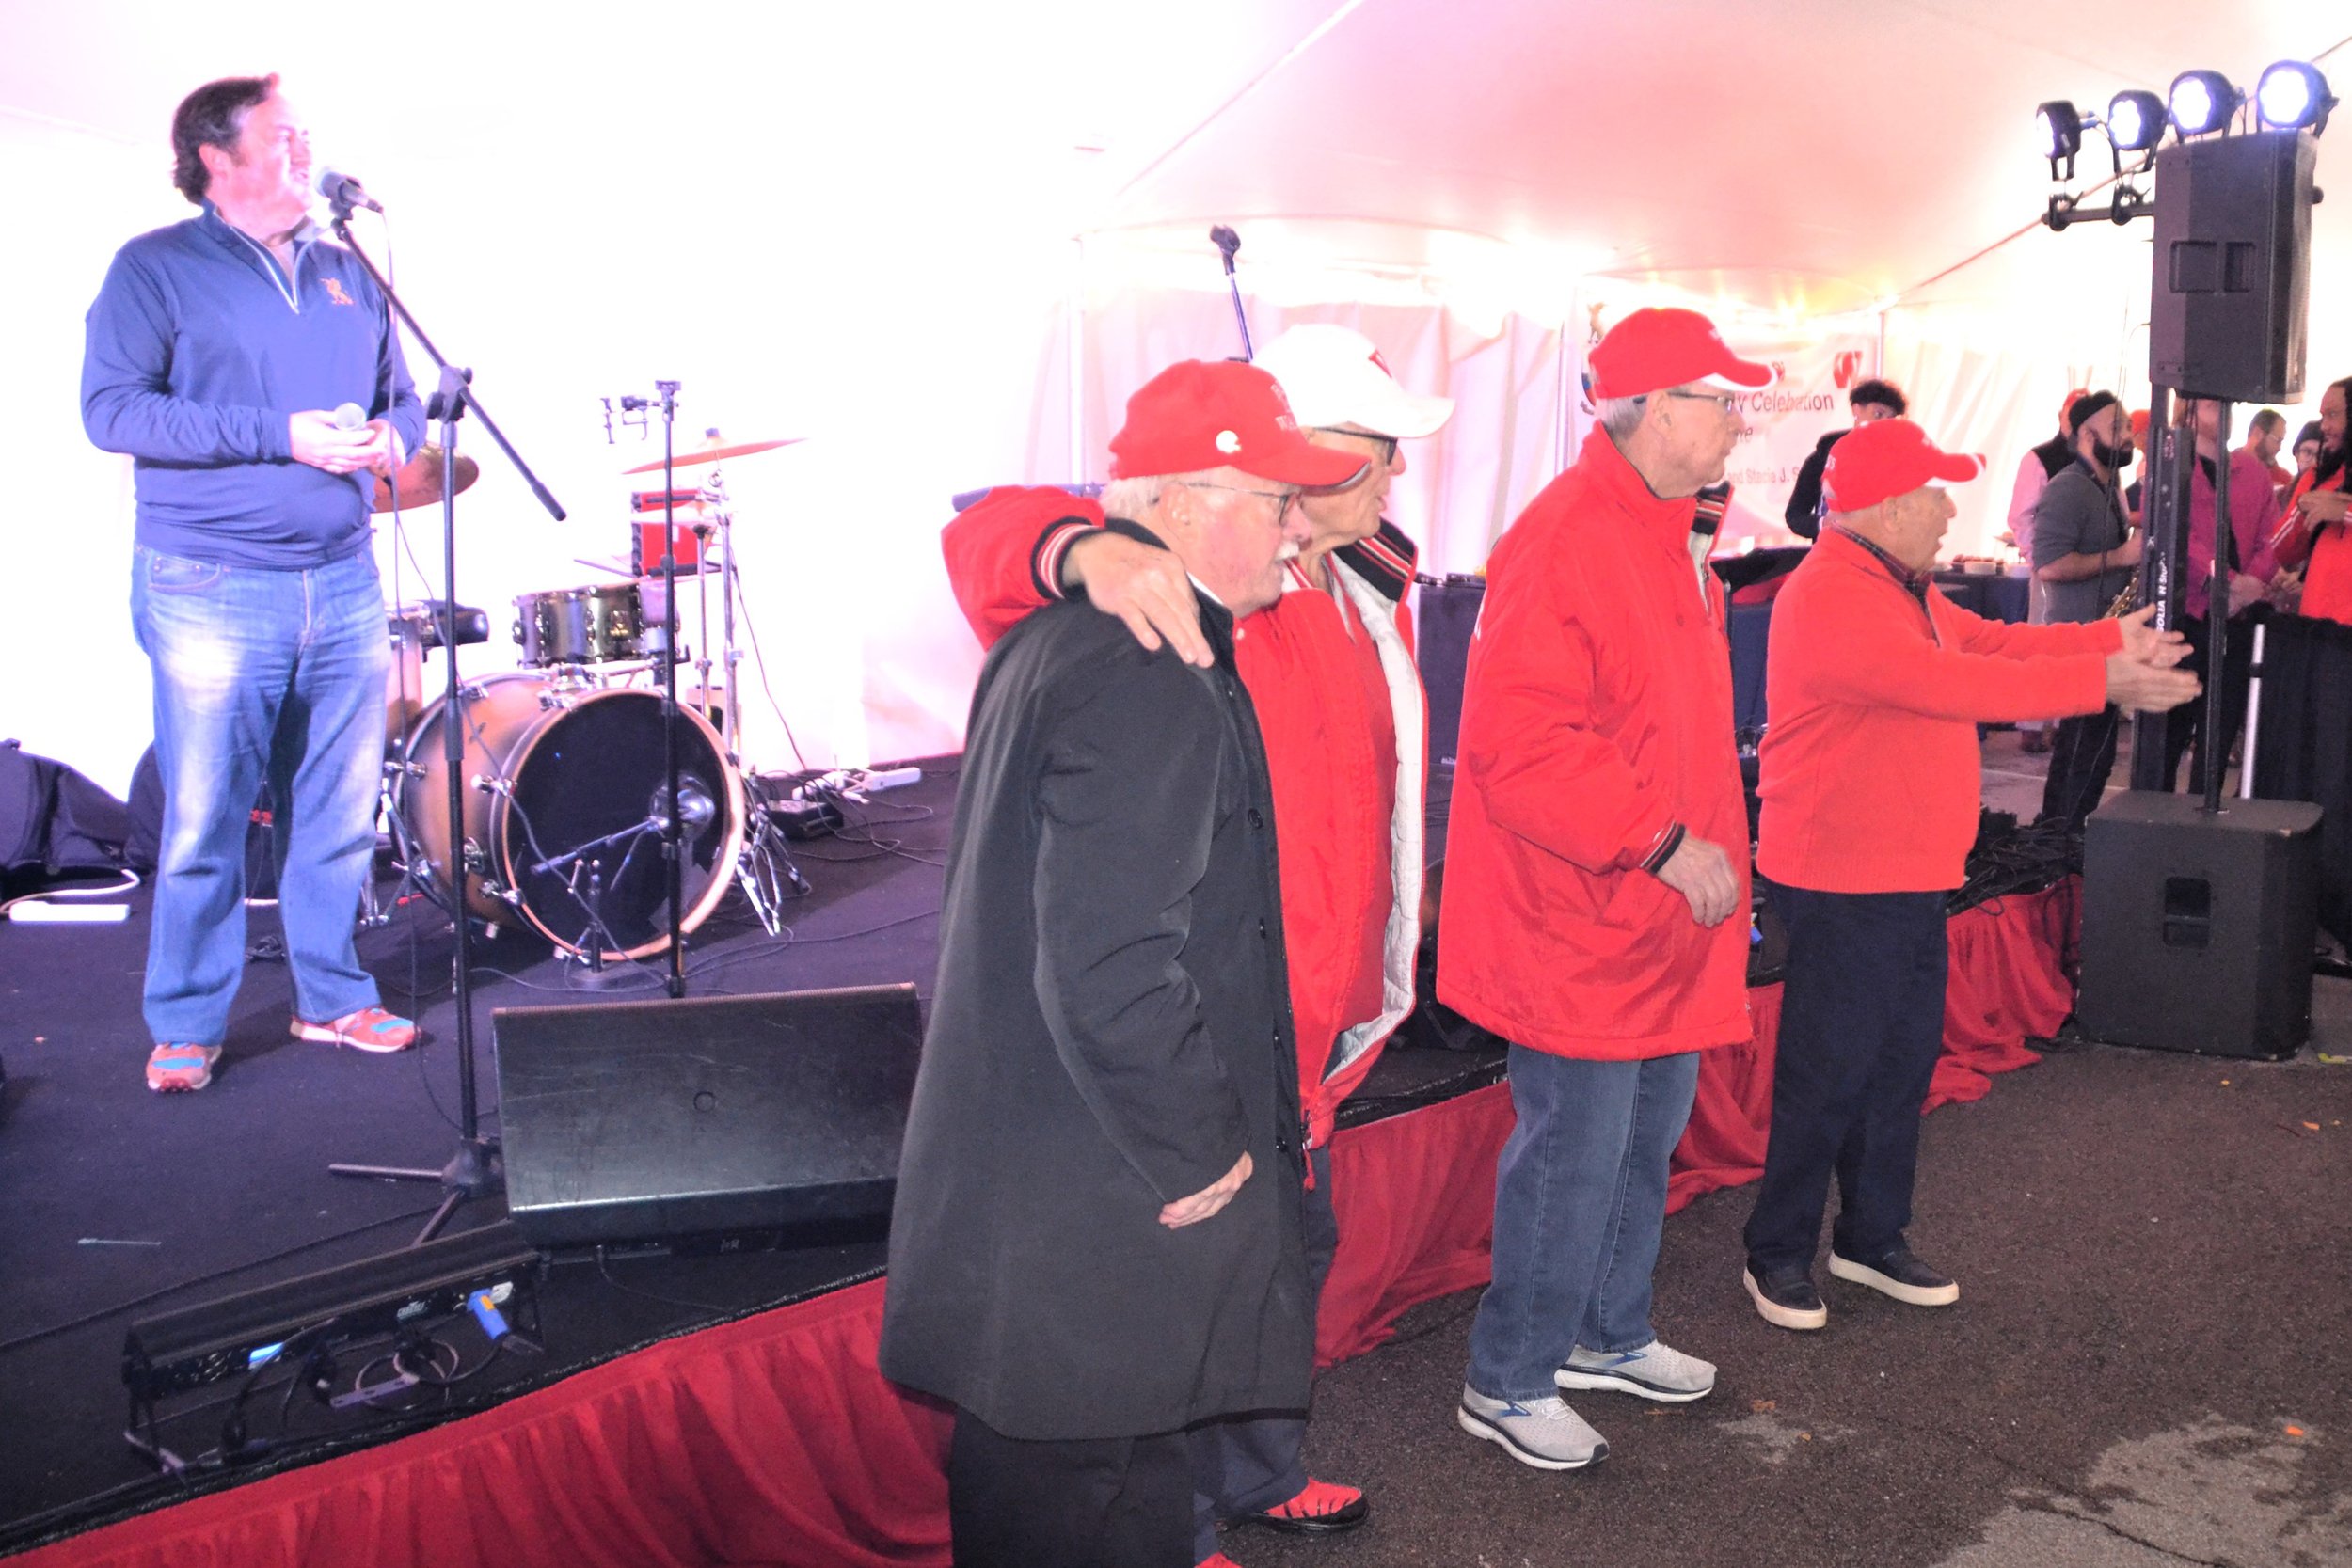  Squier Neal '66, Charlie Bell '66, Cal Black '66, and John Flanagan '66 take the stage to lead the crowd in singing Old Wabash. 